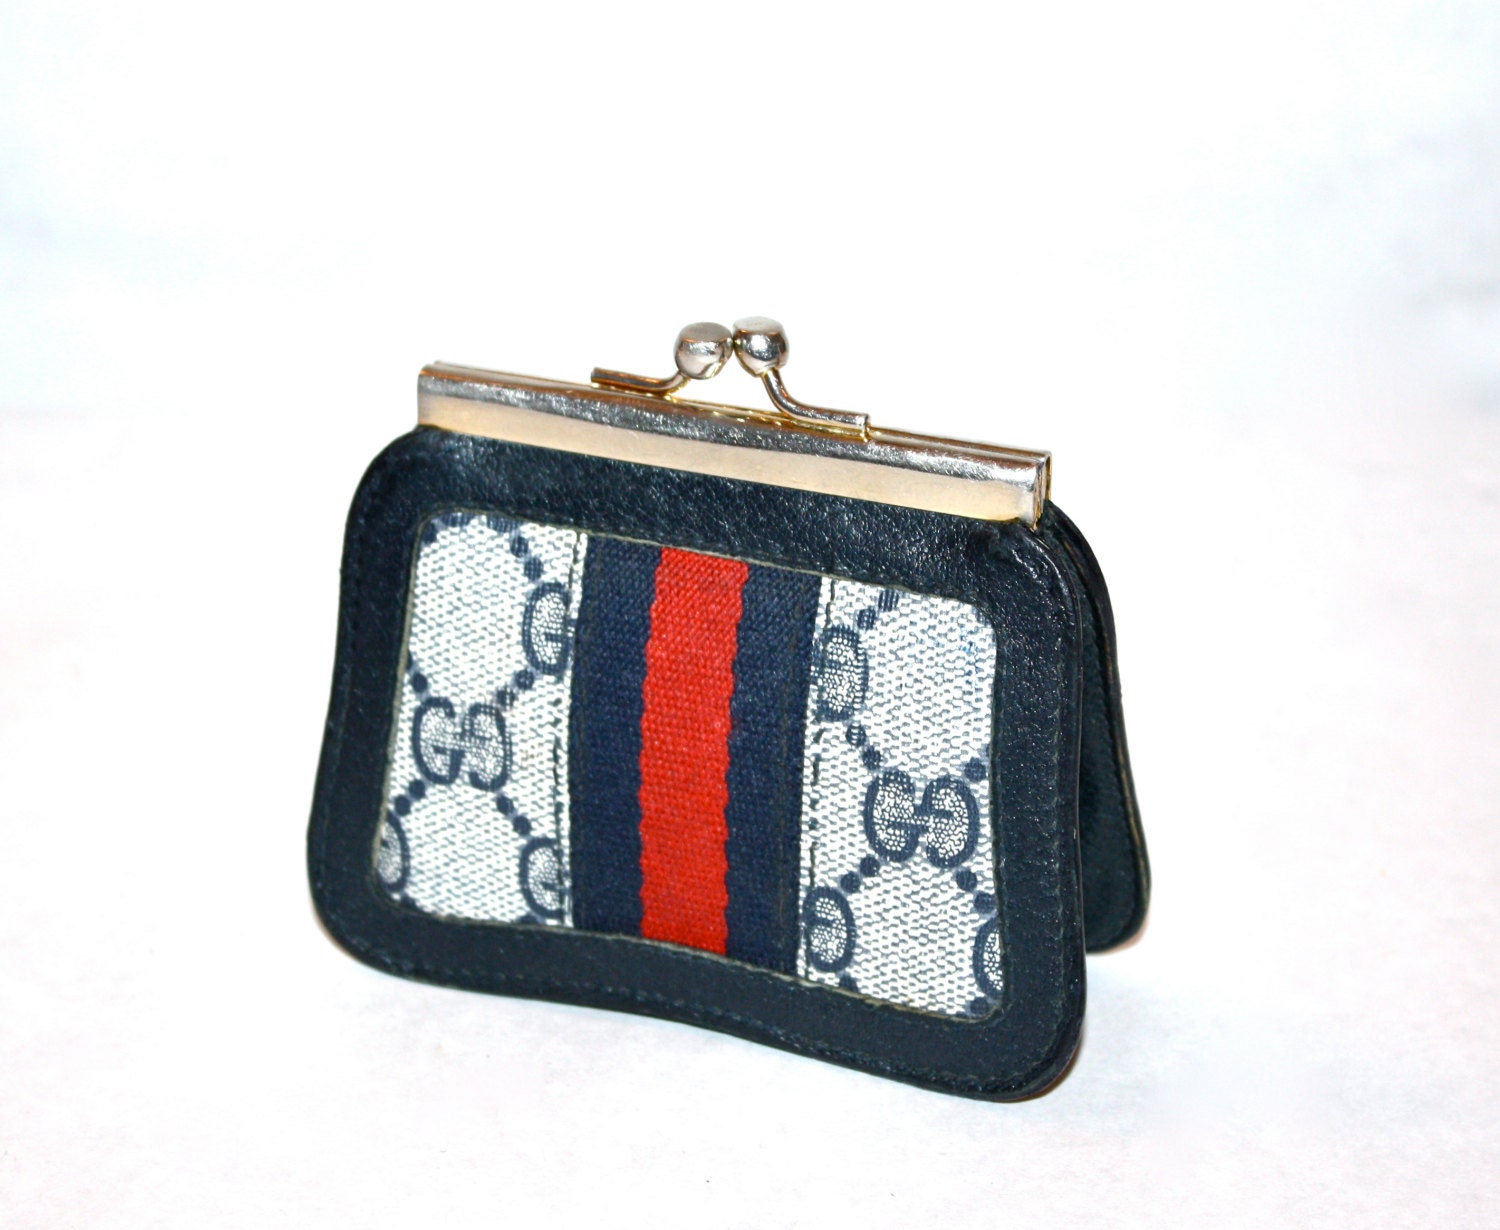 Vintage GUCCI Coin Purse Navy Blue Monogrammed by StatedStyle